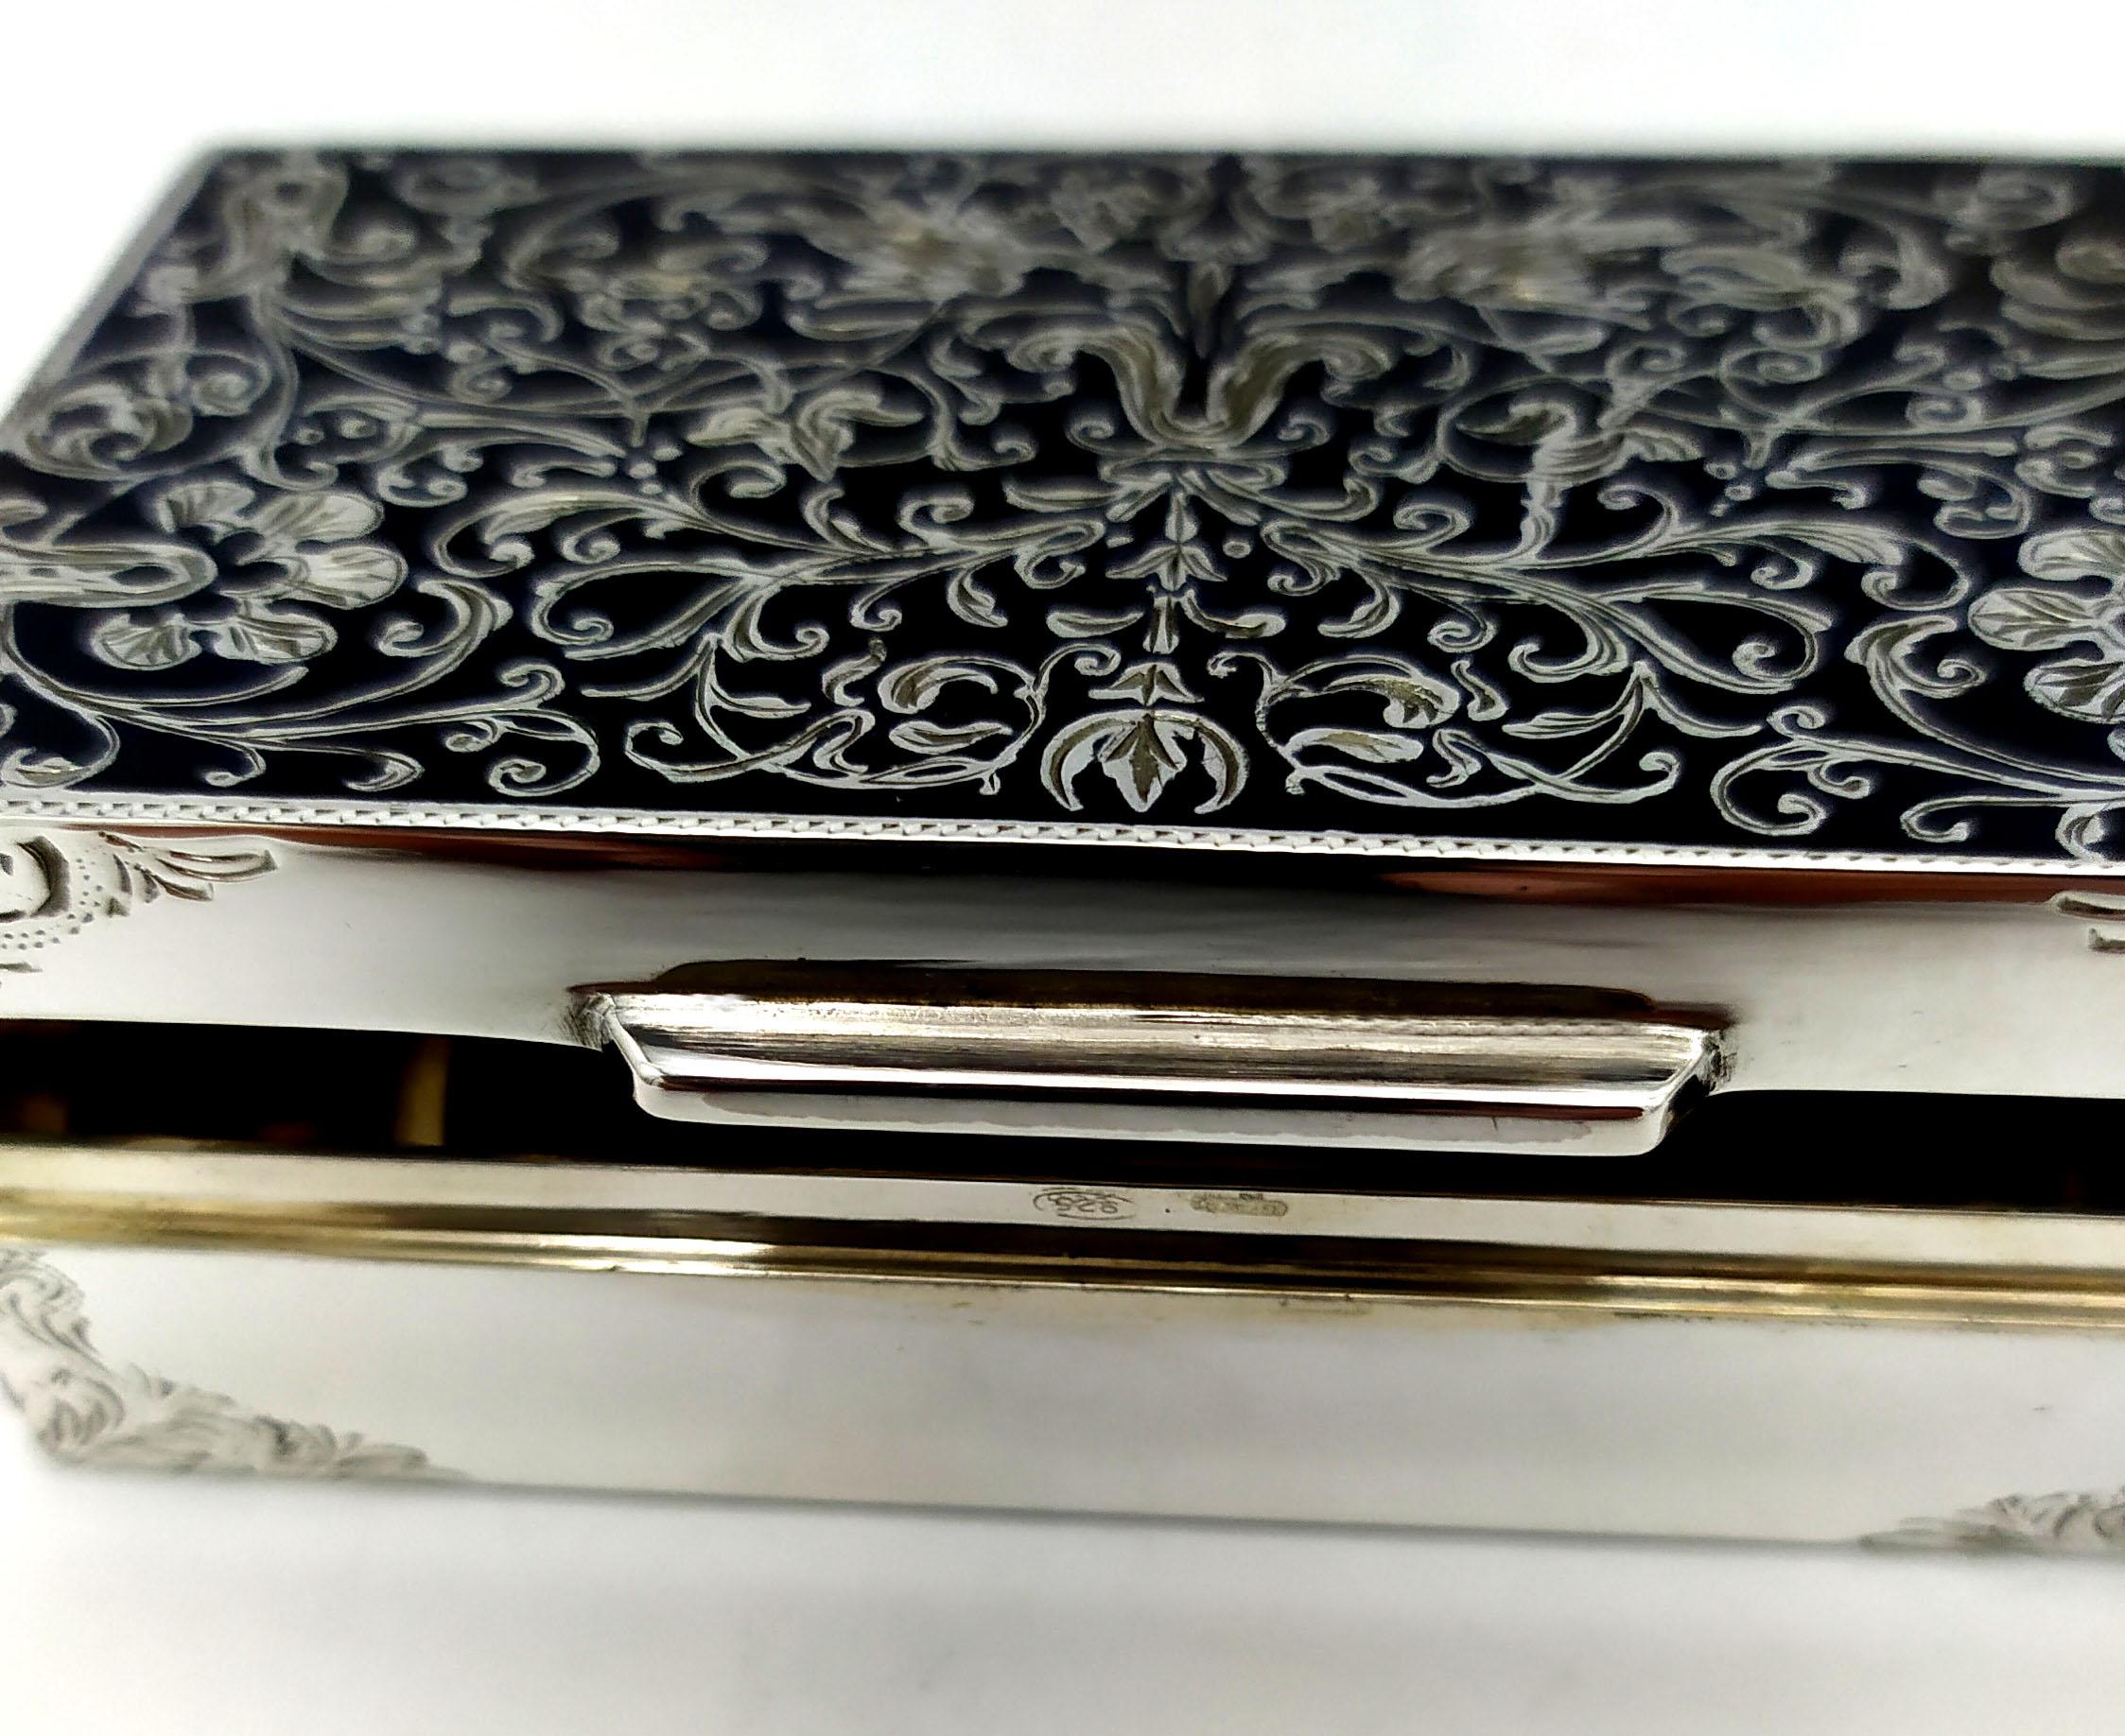 Snuff Box rectangular in 925/1000 sterling silver with fine hand engraving, black fired enameled “niello” type, in early 19th century “Rococo” style. Snuff Box measurements cm. 4.5 x 7.7 x 2. Weight gr. 126. Designed by Franco Salimbeni in 1981 and